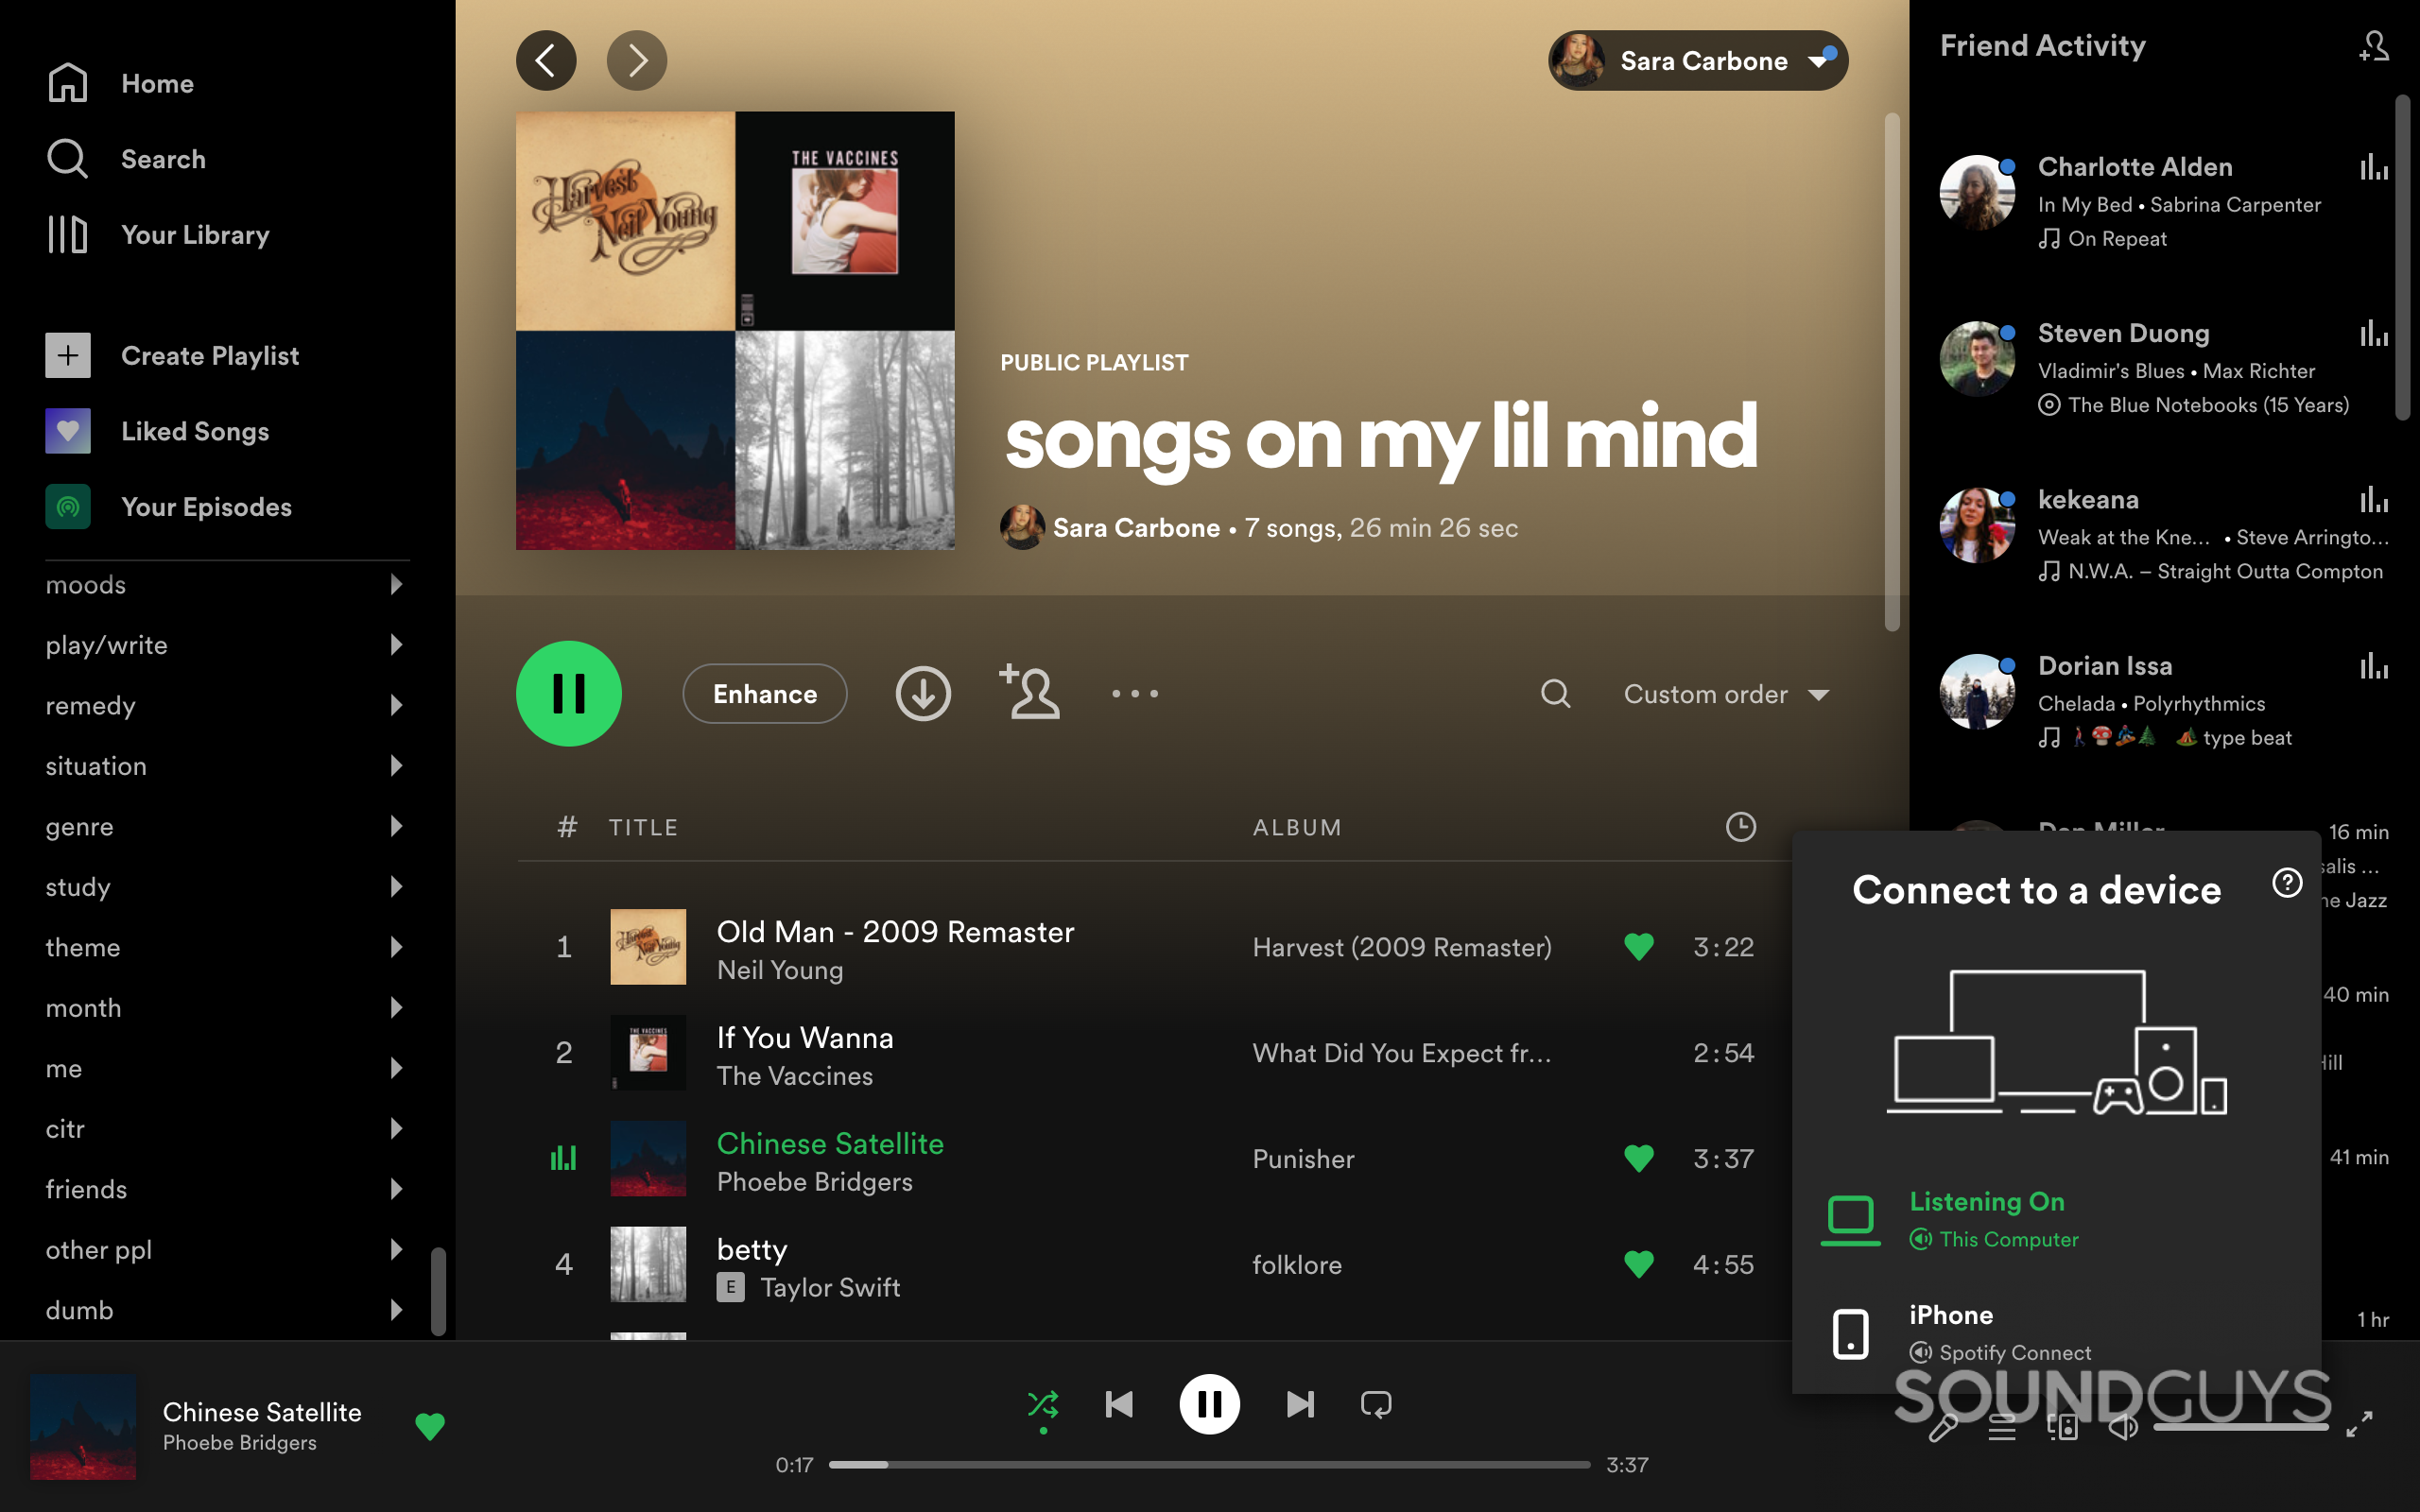 Spotify Desktop vs Web Player: Which Spotify Has Better Features?